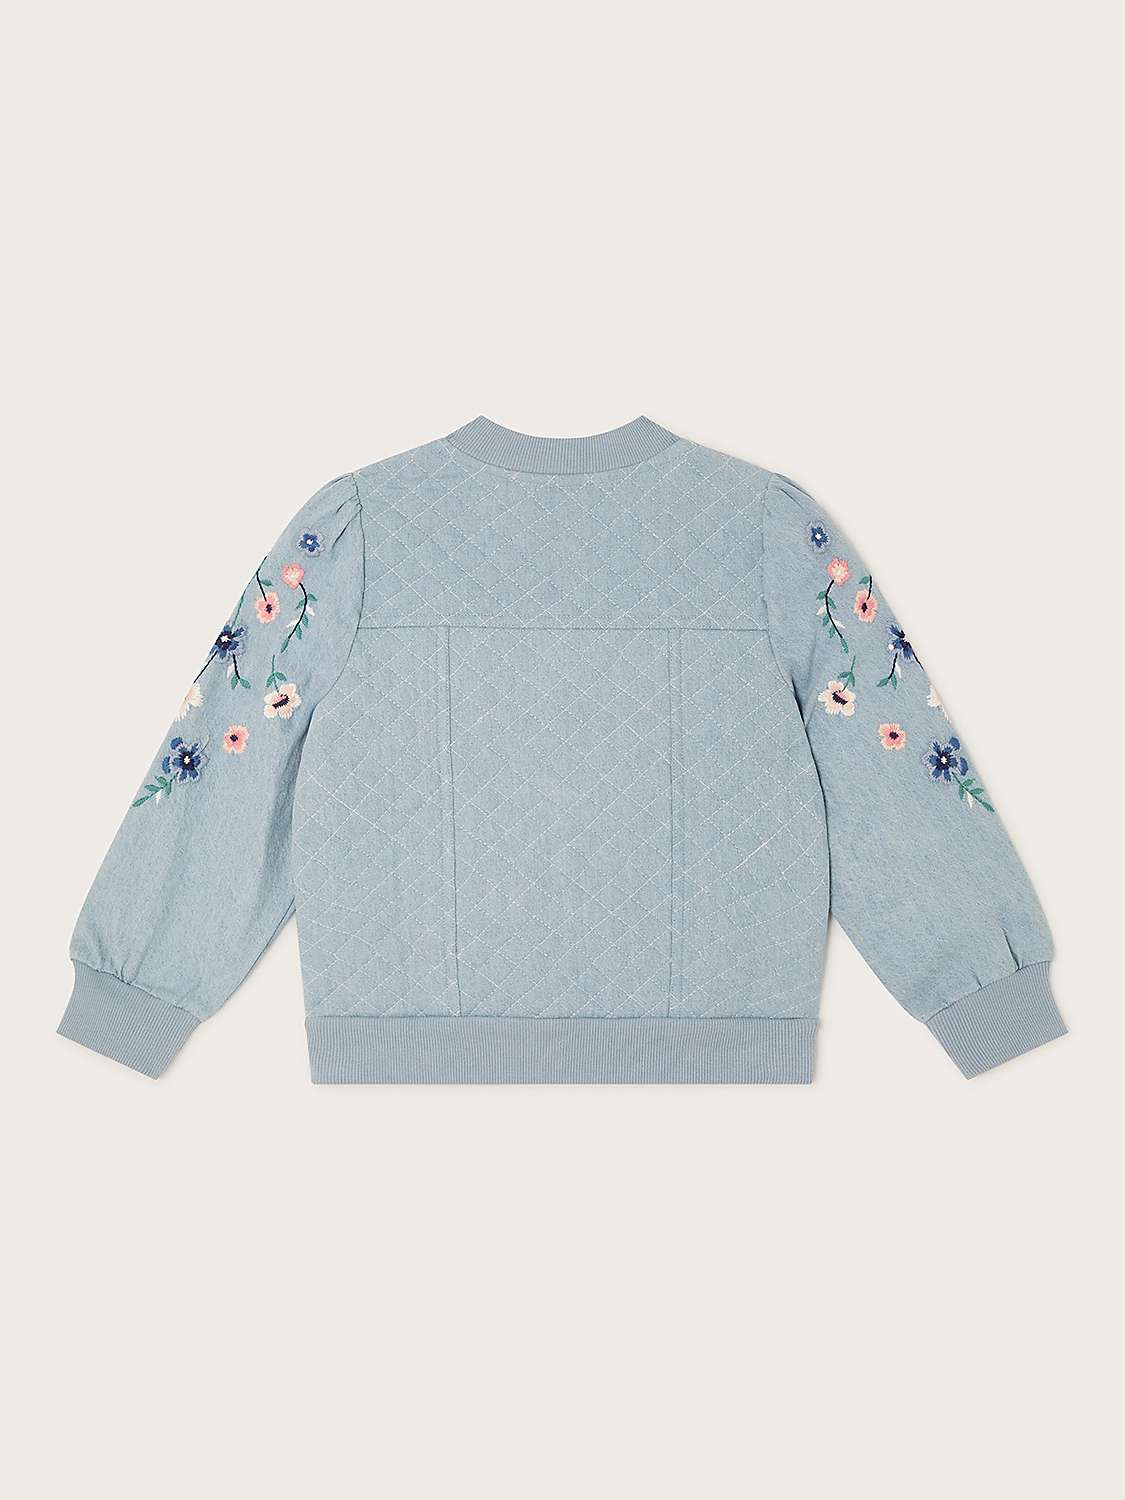 Buy Monsoon Kids' Chambray Floral Embroidered Bomber Jacket, Blue Online at johnlewis.com